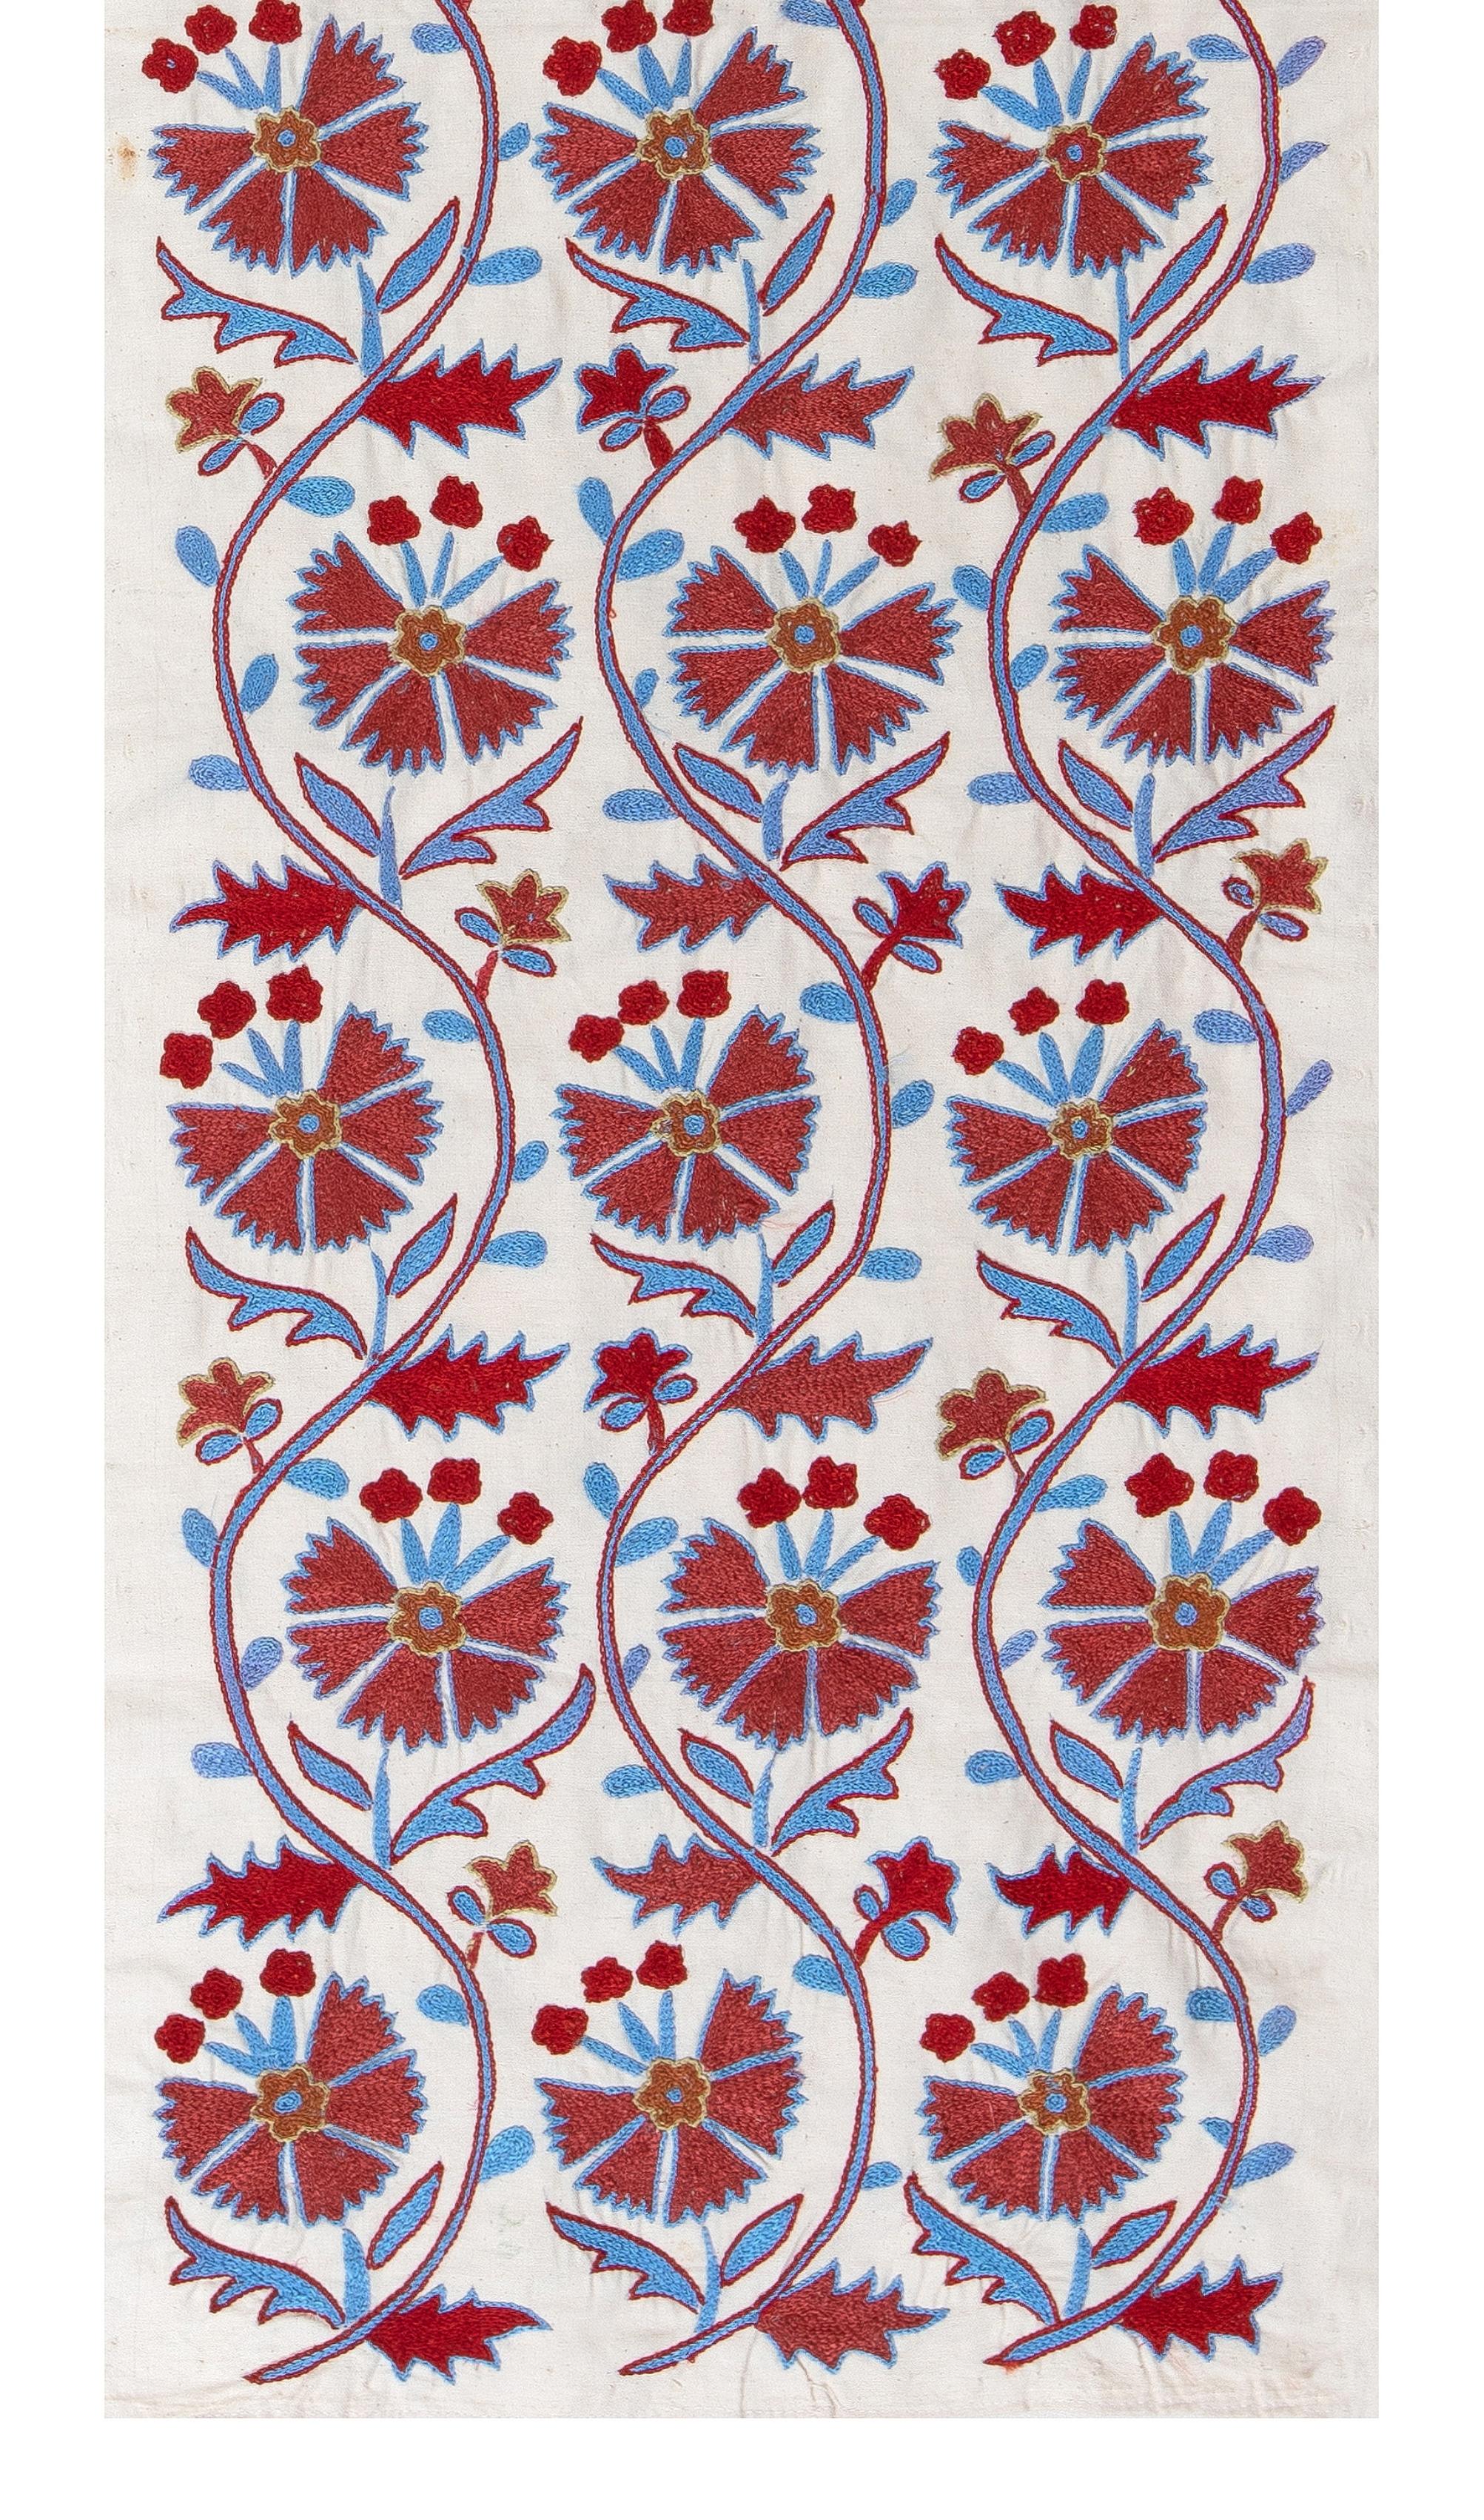 Uzbek 1.7x6.2 Ft Central Asian Suzani Textile, Embroidered Cotton & Silk Wall Hanging For Sale